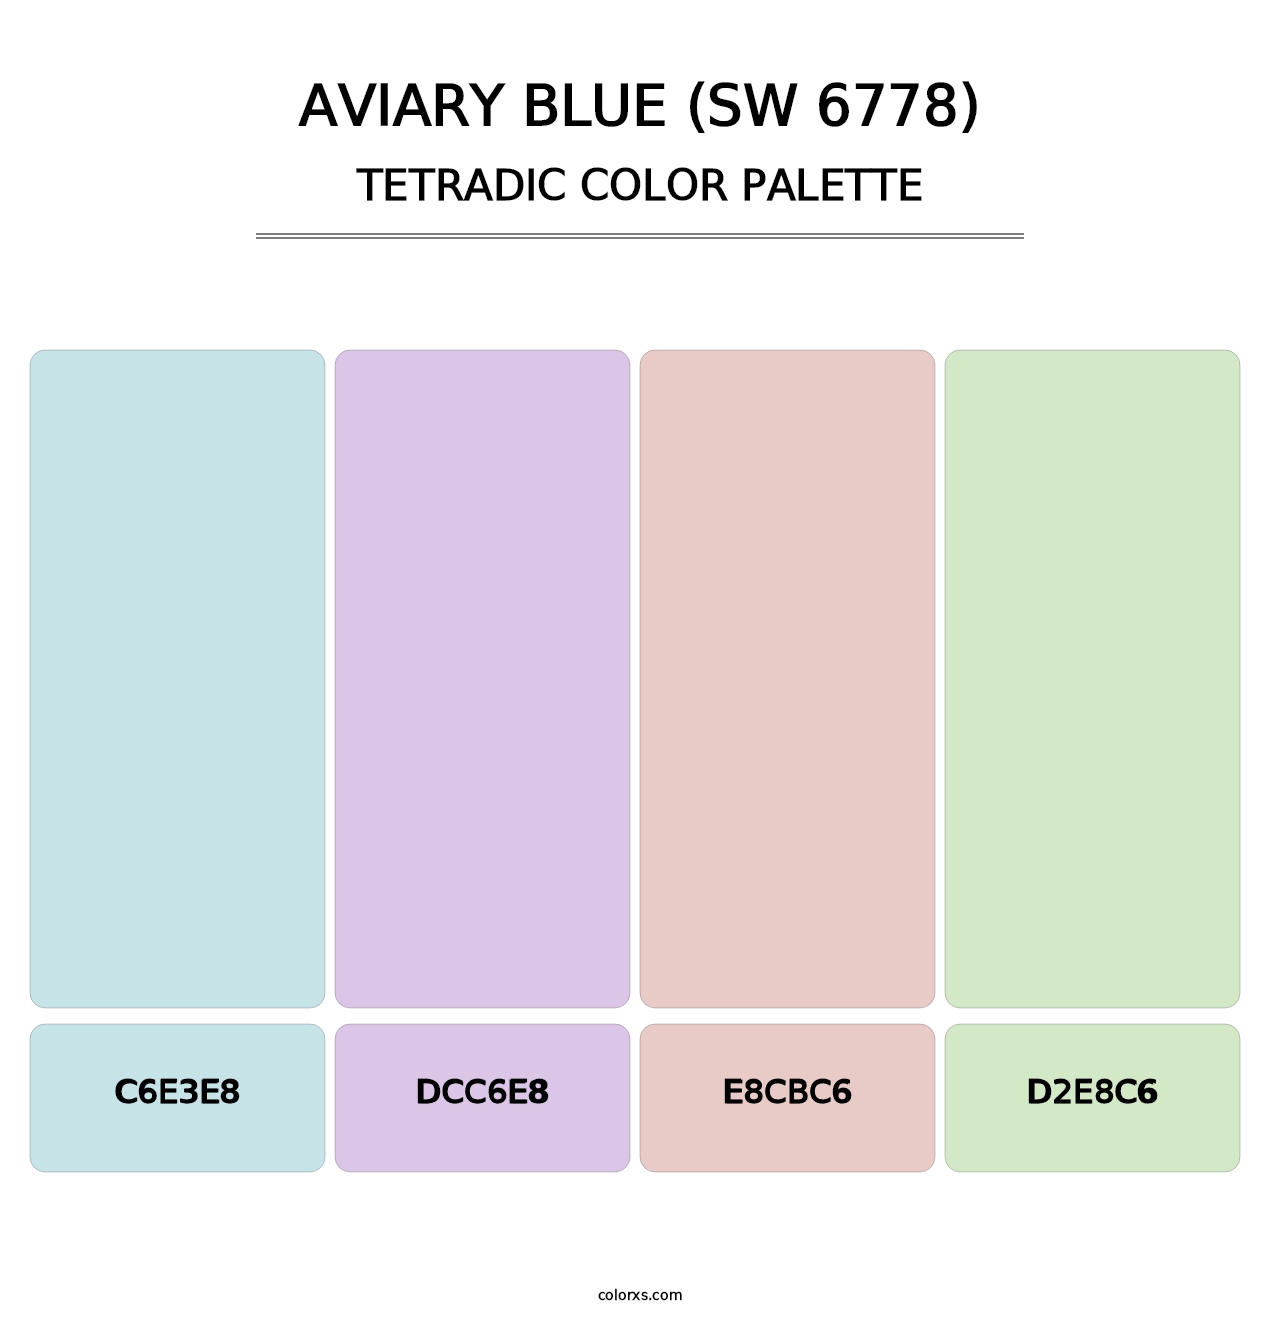 Aviary Blue (SW 6778) - Tetradic Color Palette